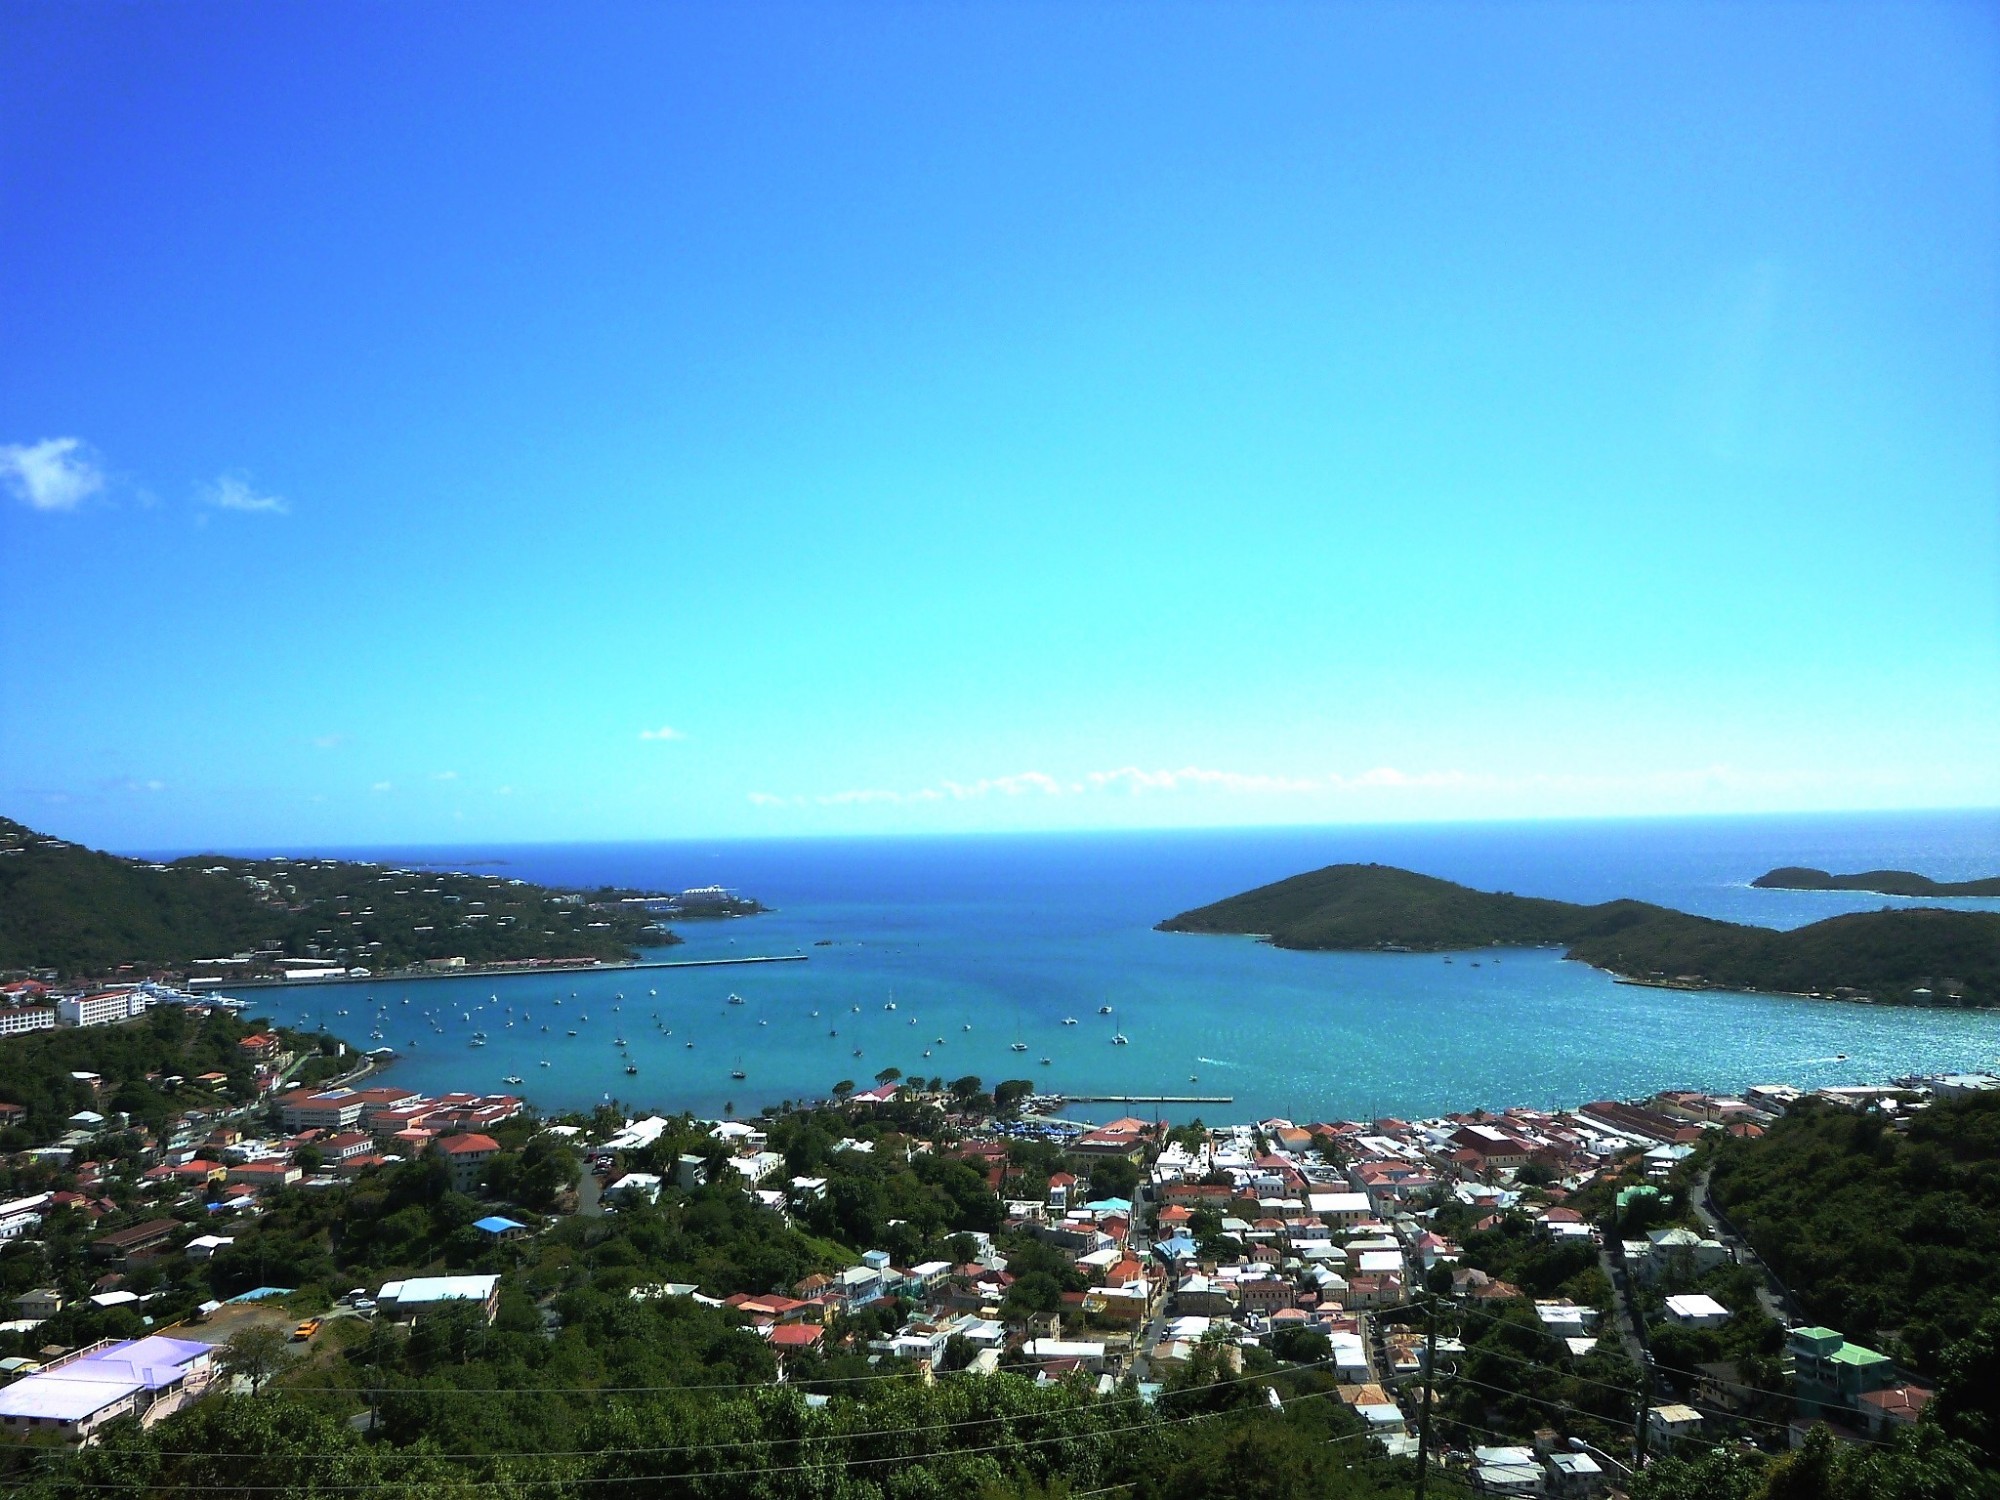 St. Thomas - View of Charlotte Amalie harbor from the Mafolie Hotel